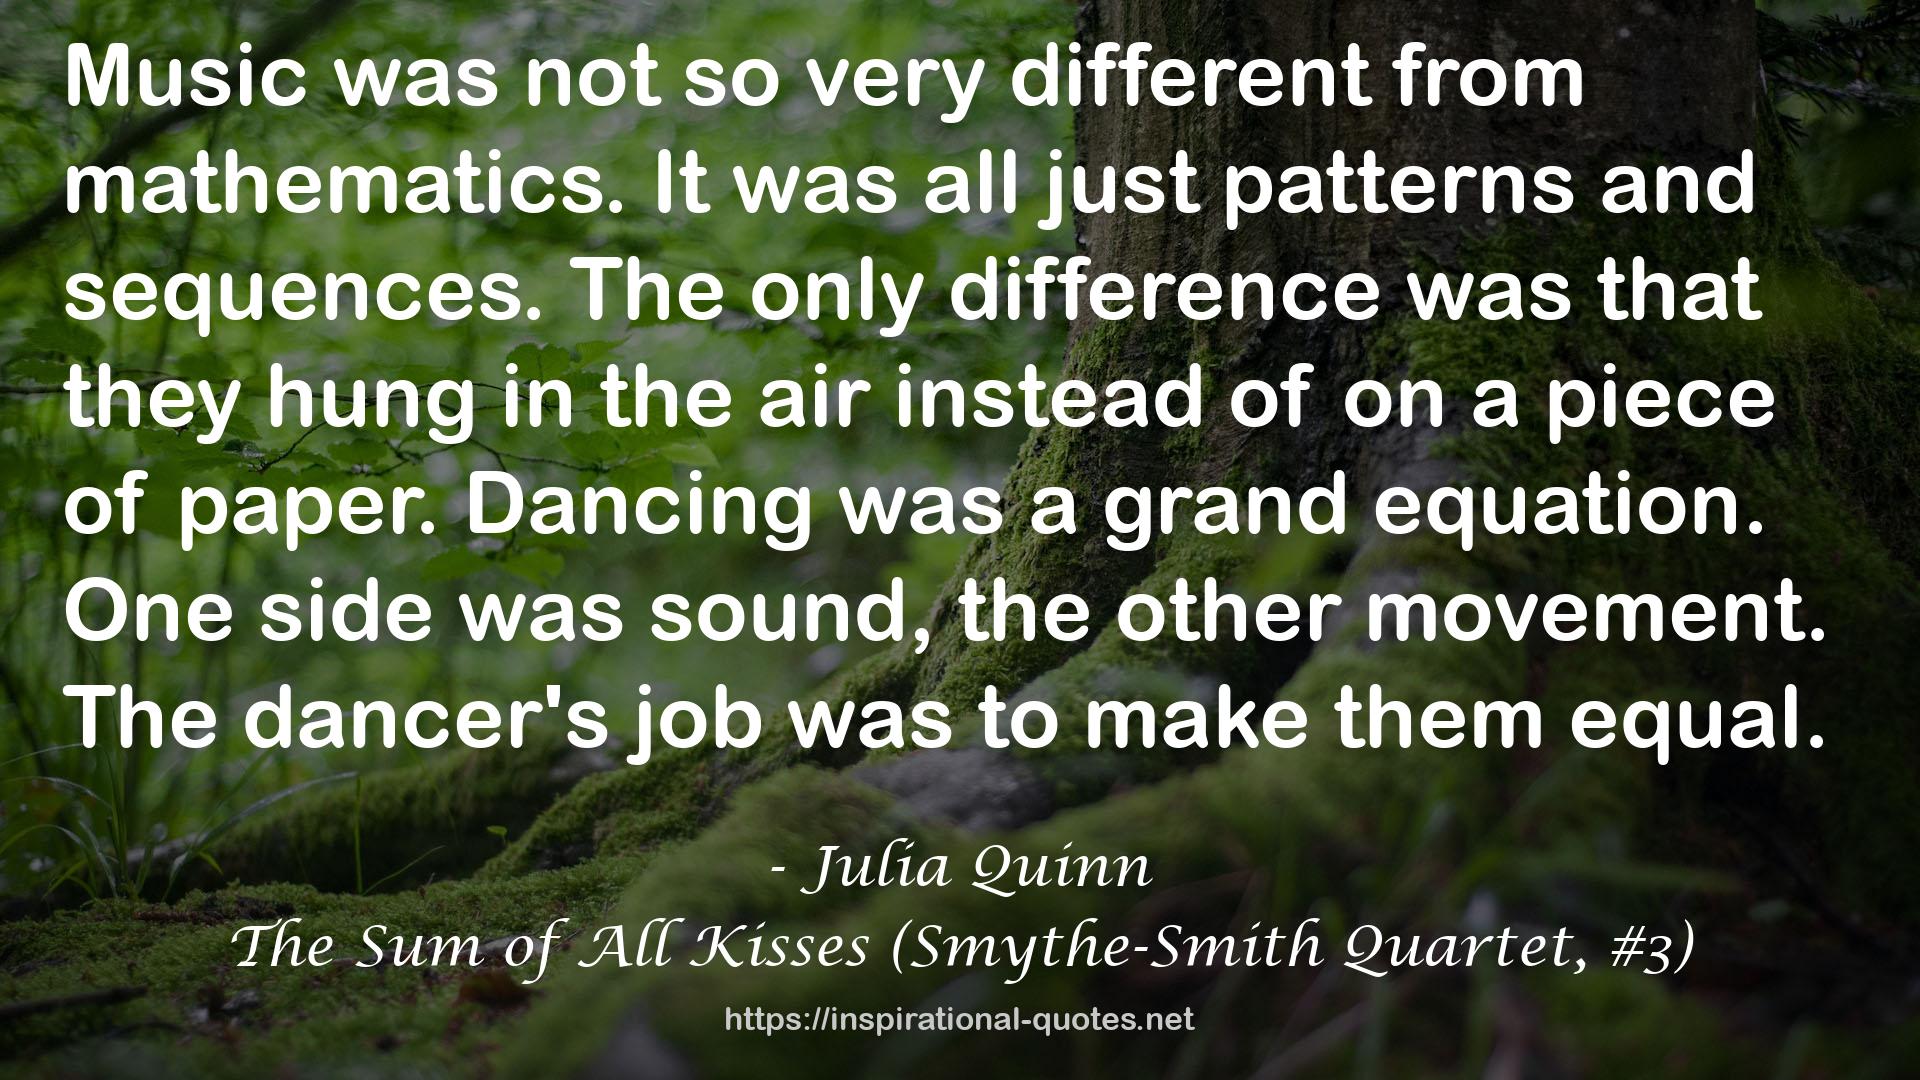 The dancer's job  QUOTES